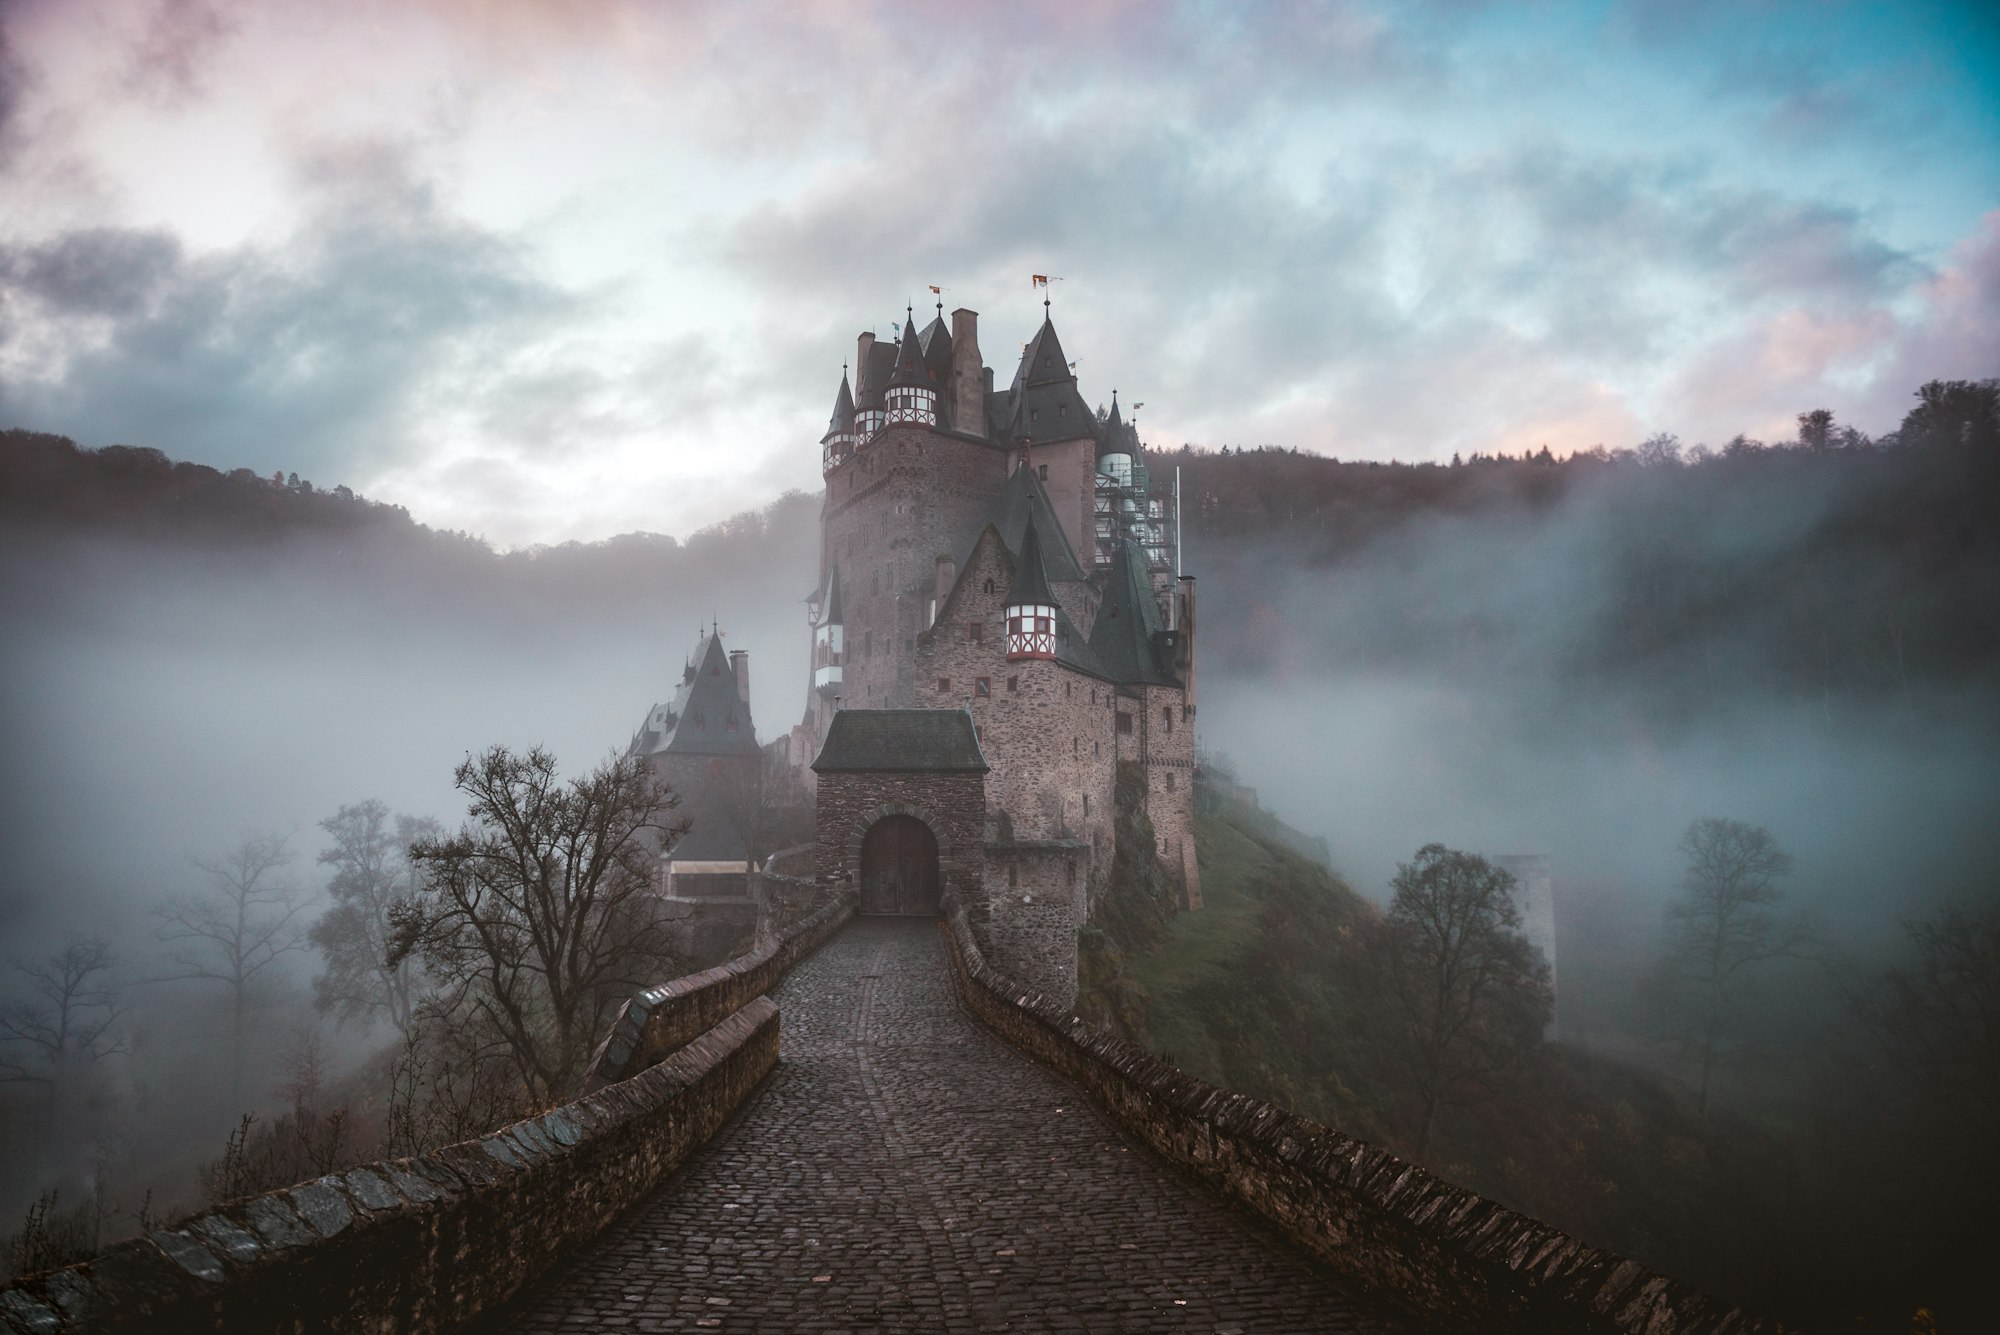 We went to Germany for one day to explore some famous instagram photo spots. The first stop was Burg Eltz during sunrise. With no tourists there yet and this amazing fog covering the castle it was like a fairytale.